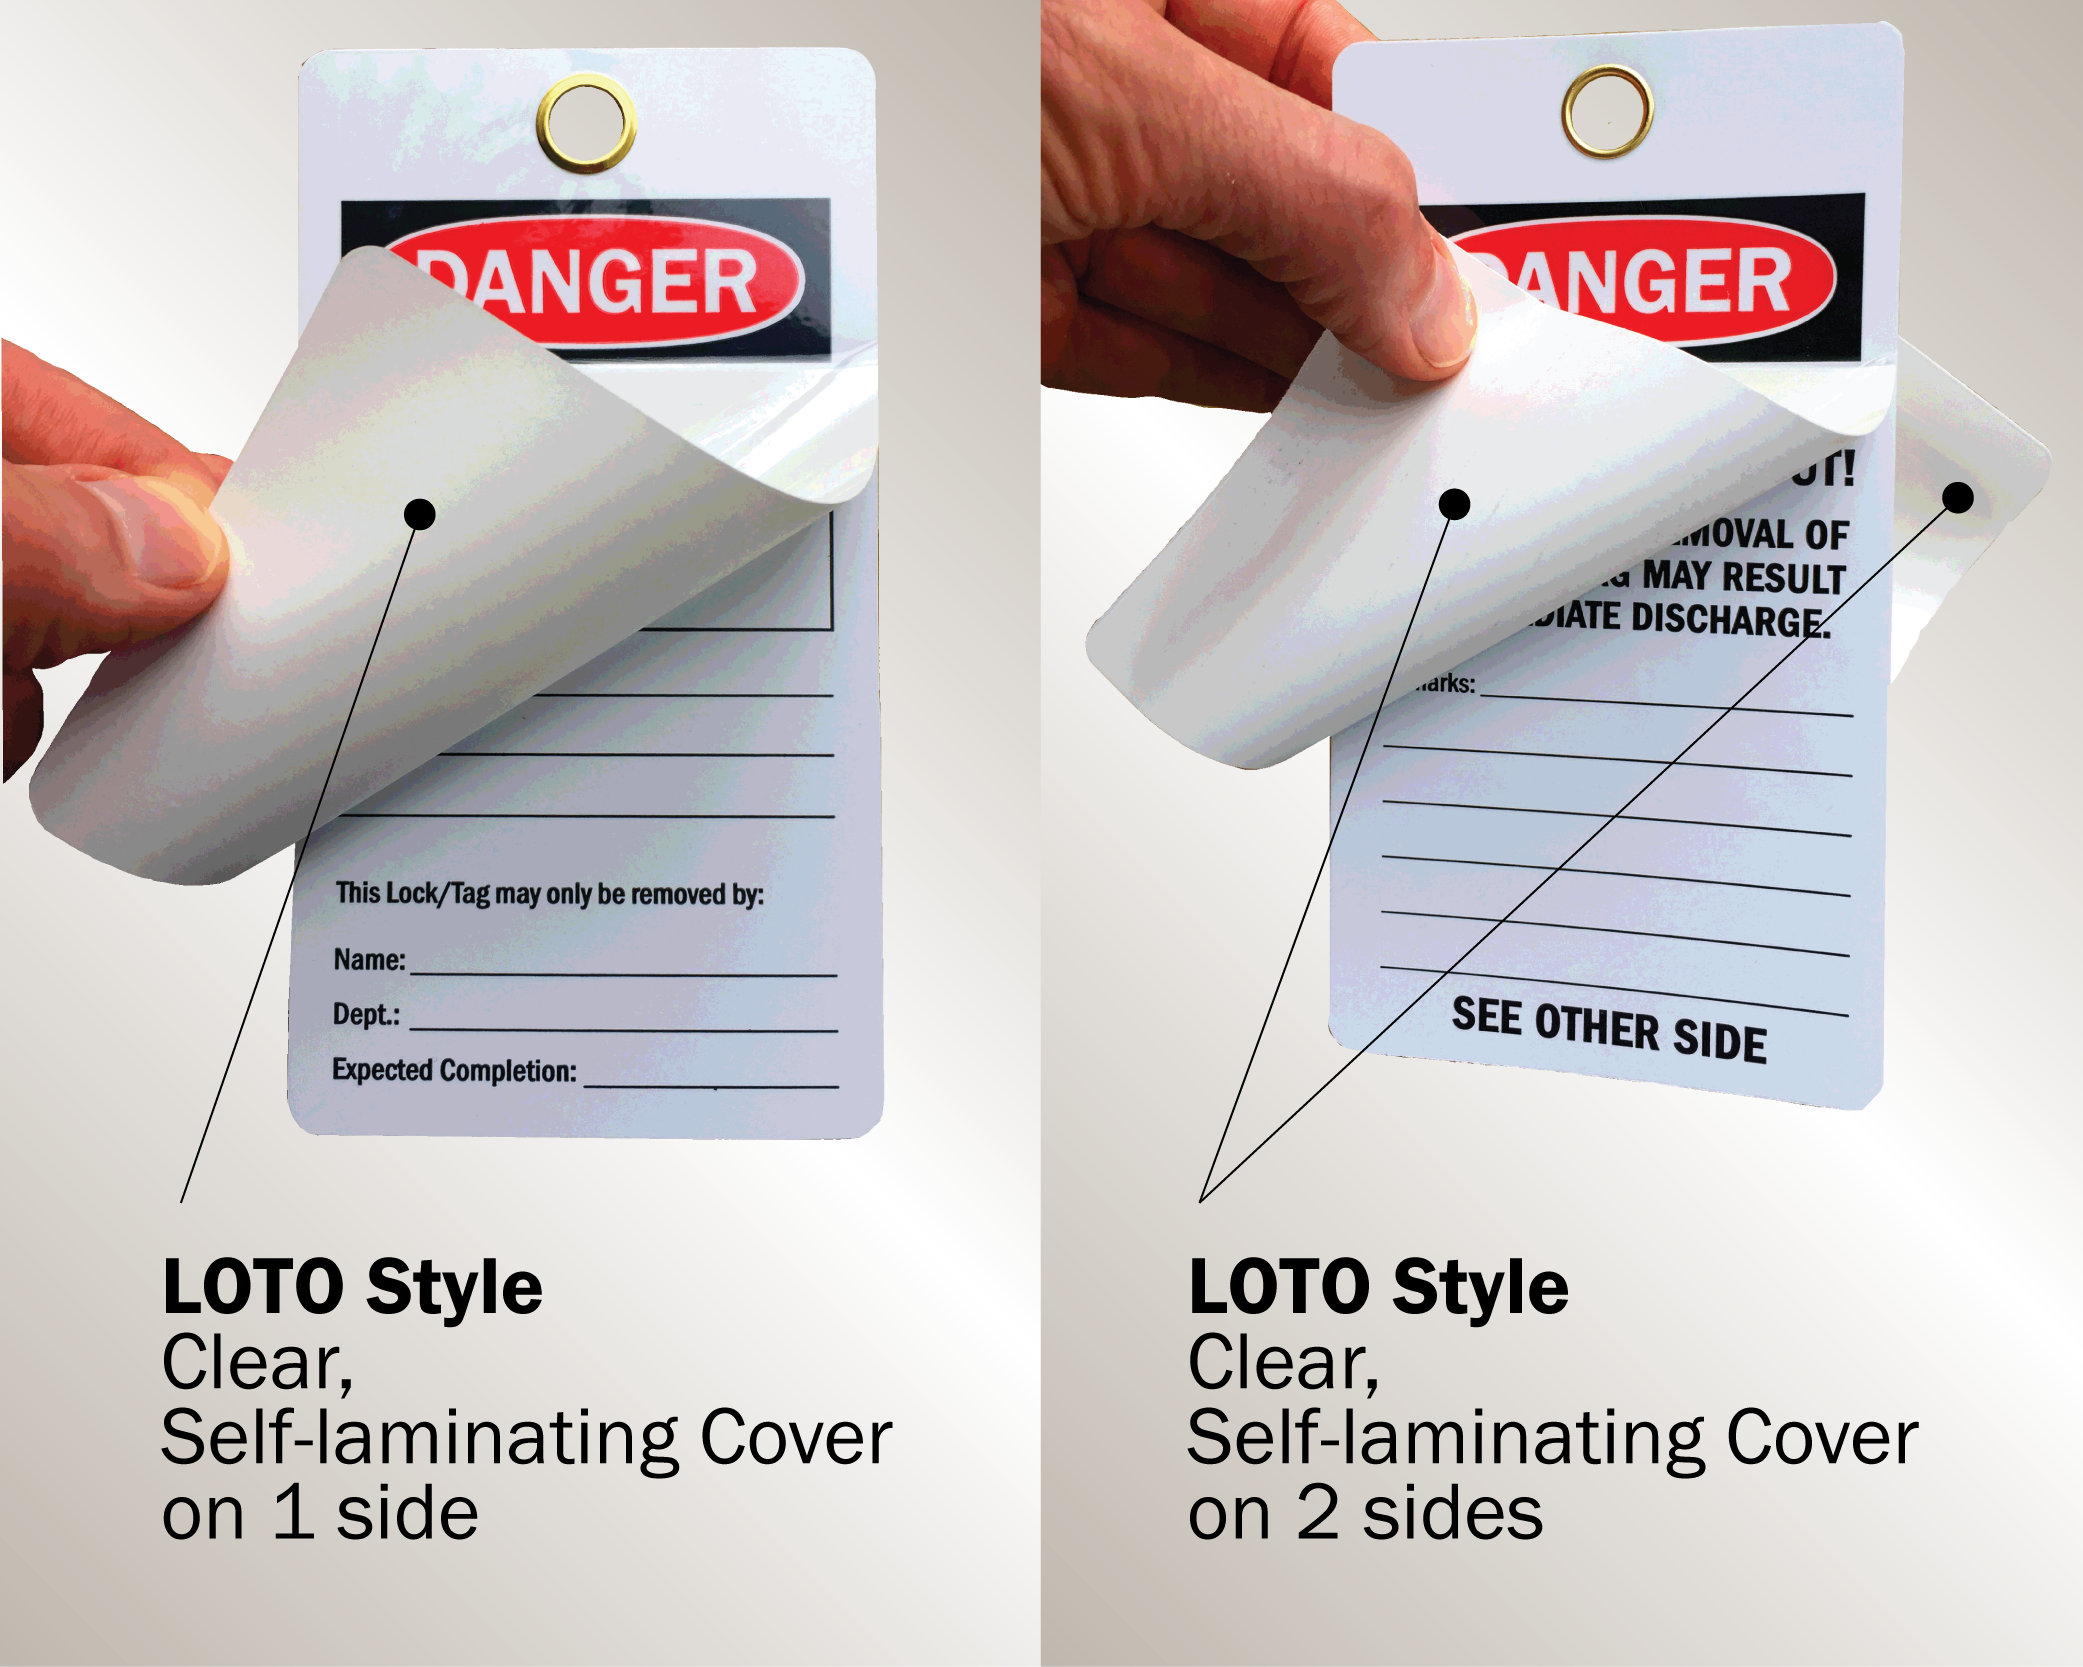 An image of OSHA style lockout safety tags with a metal eyelet, rounded corners and self-laminating covers on one or two sides. Header on tags reads, "Danger".